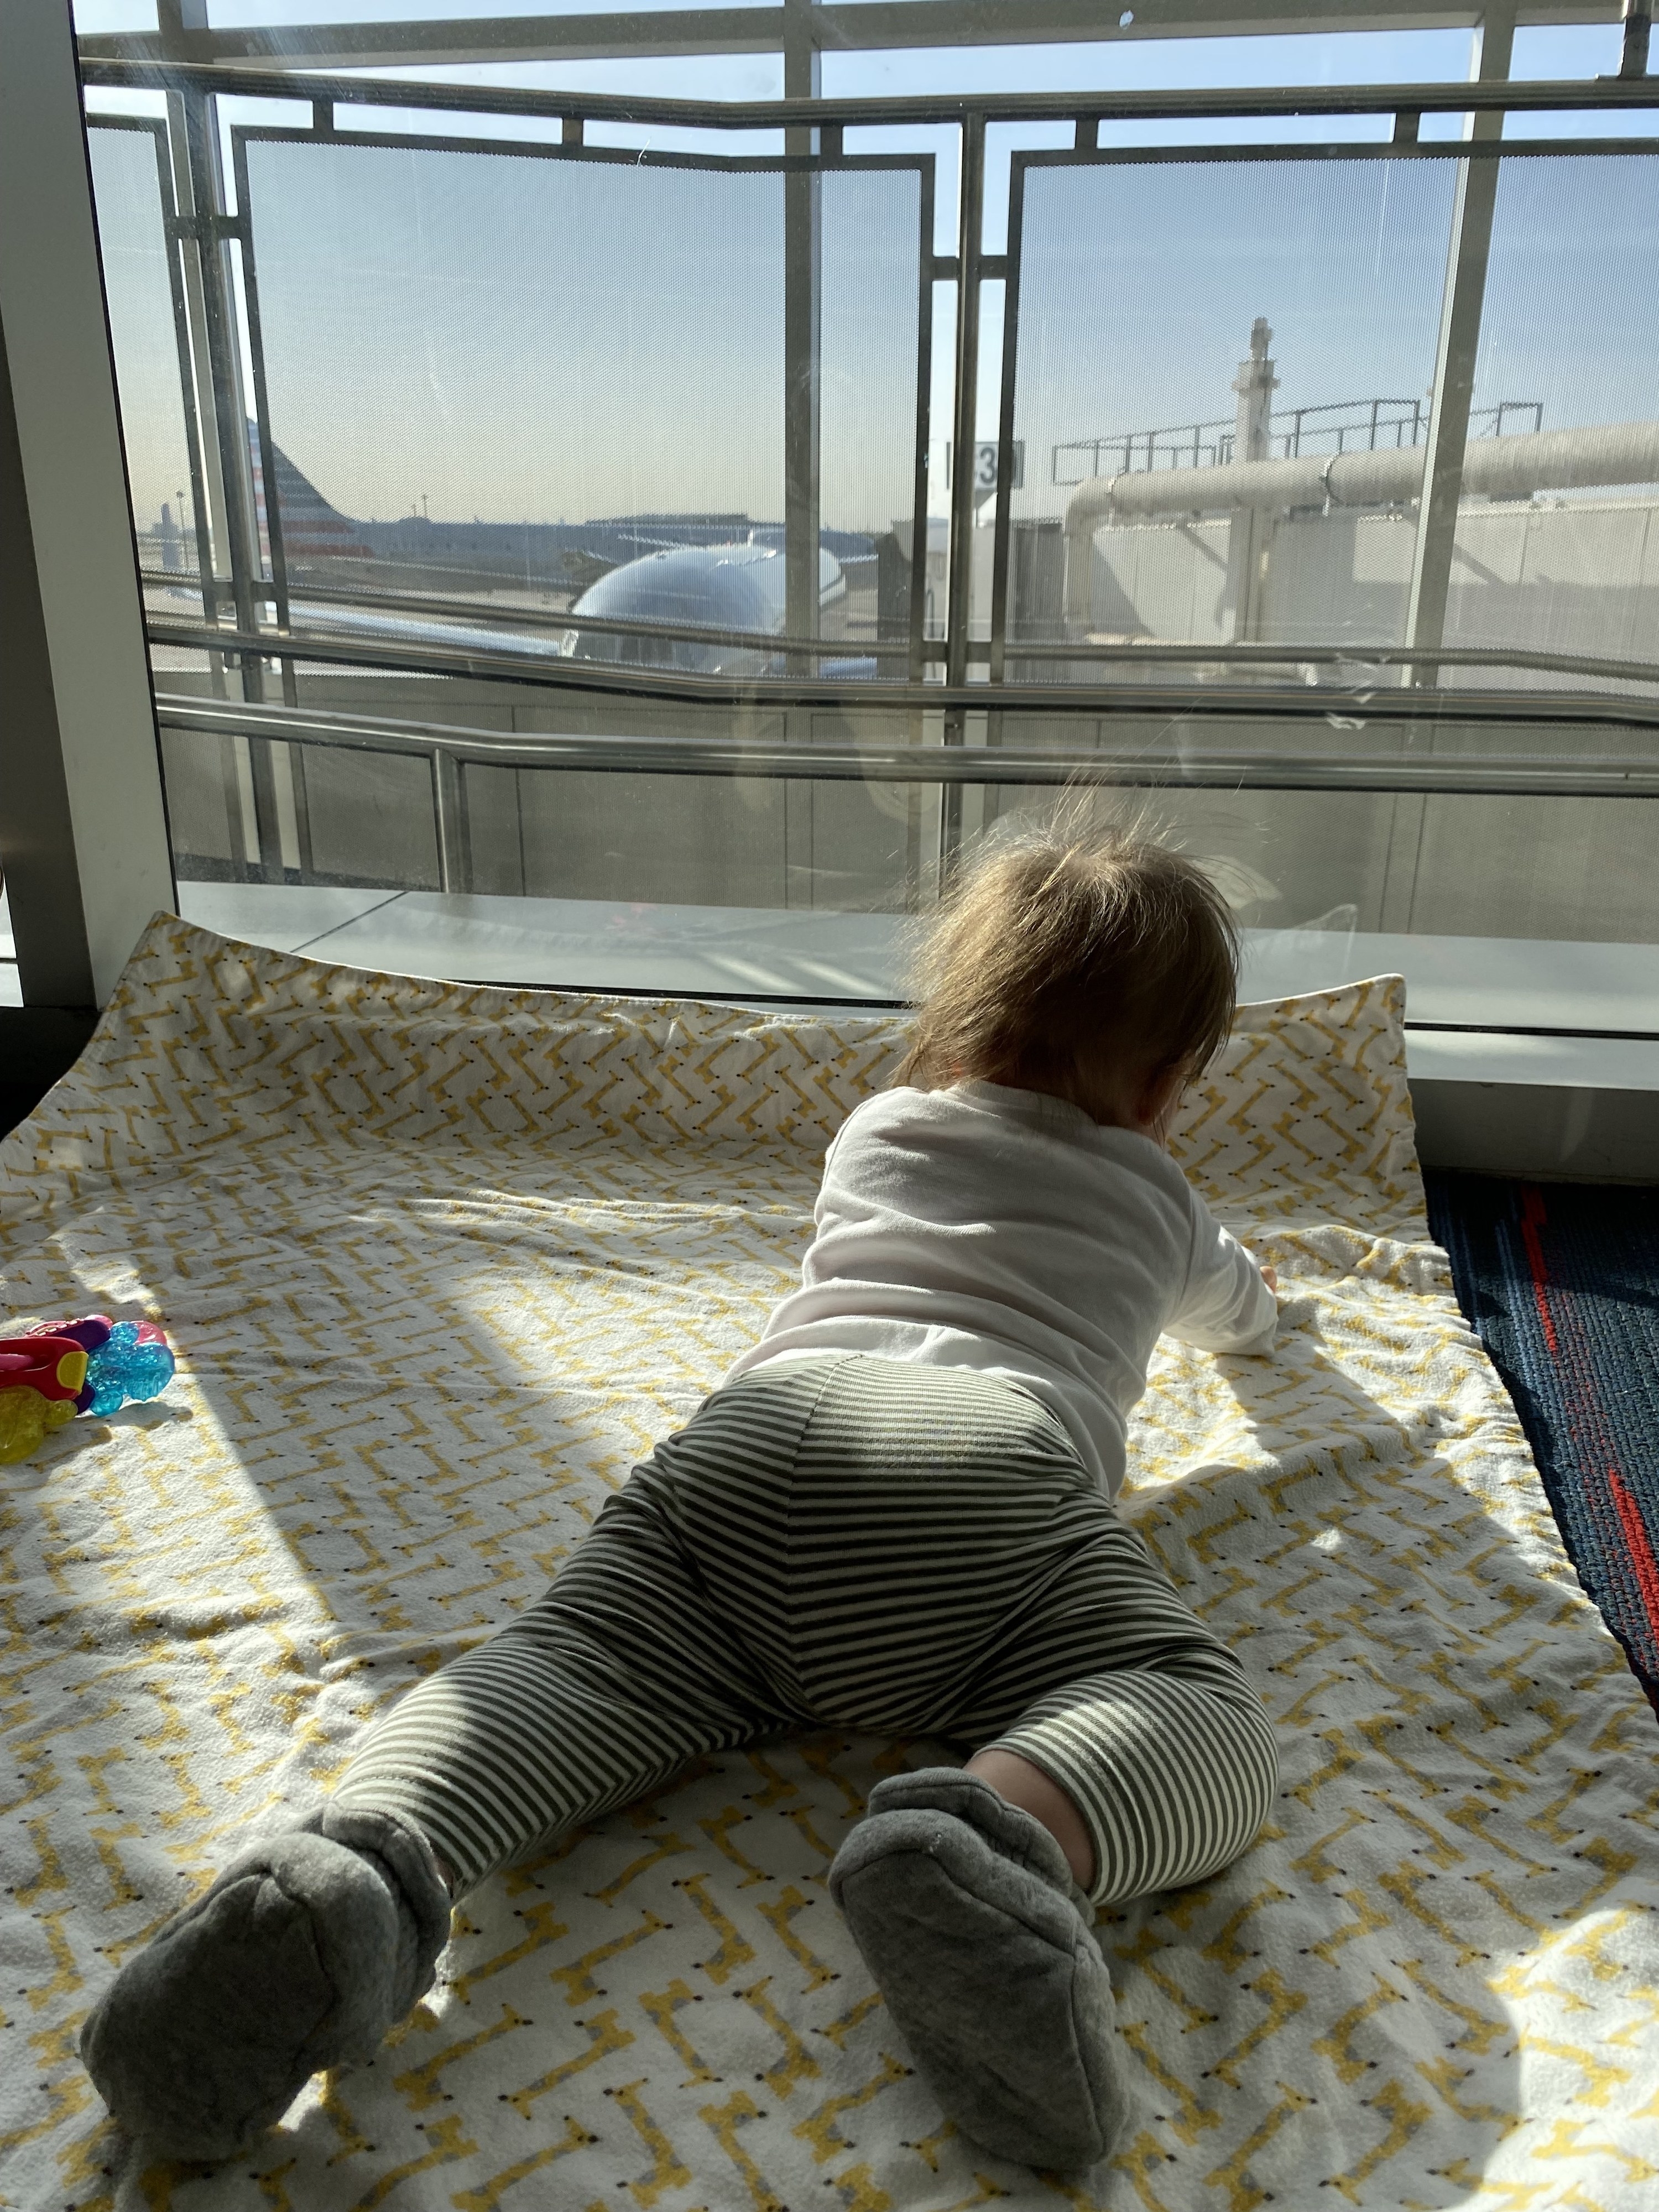 Baby on the floor of an airport